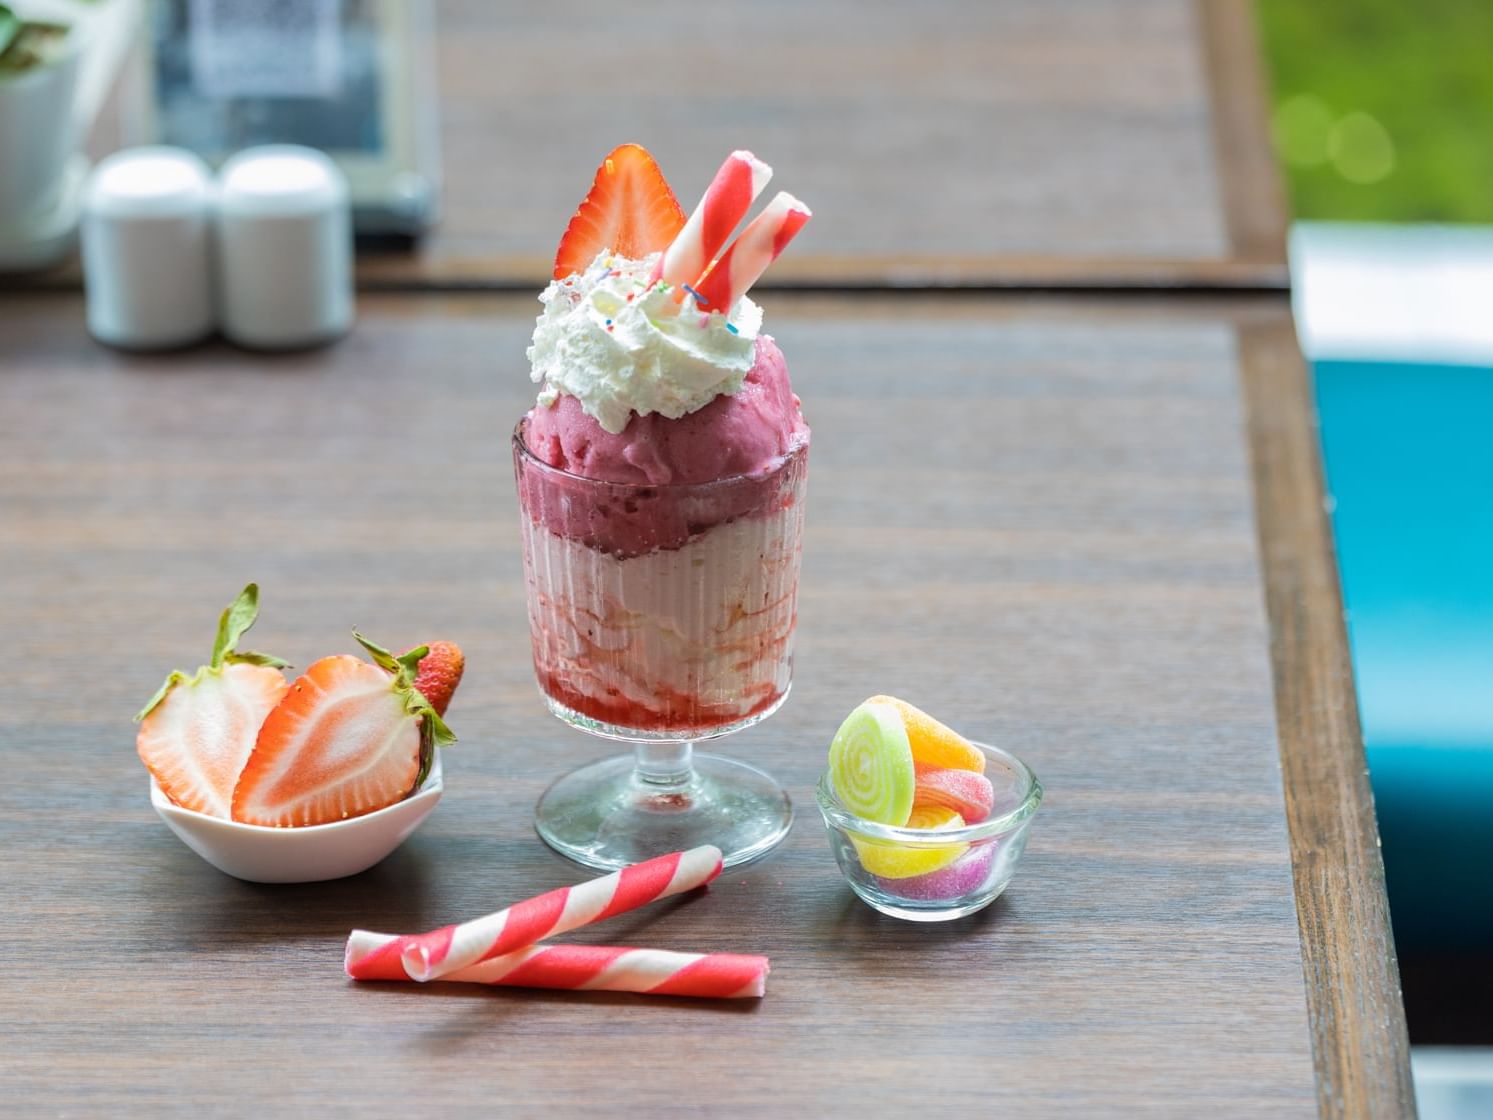 Ice cream & strawberries served at Chatrium Hotels & Residences